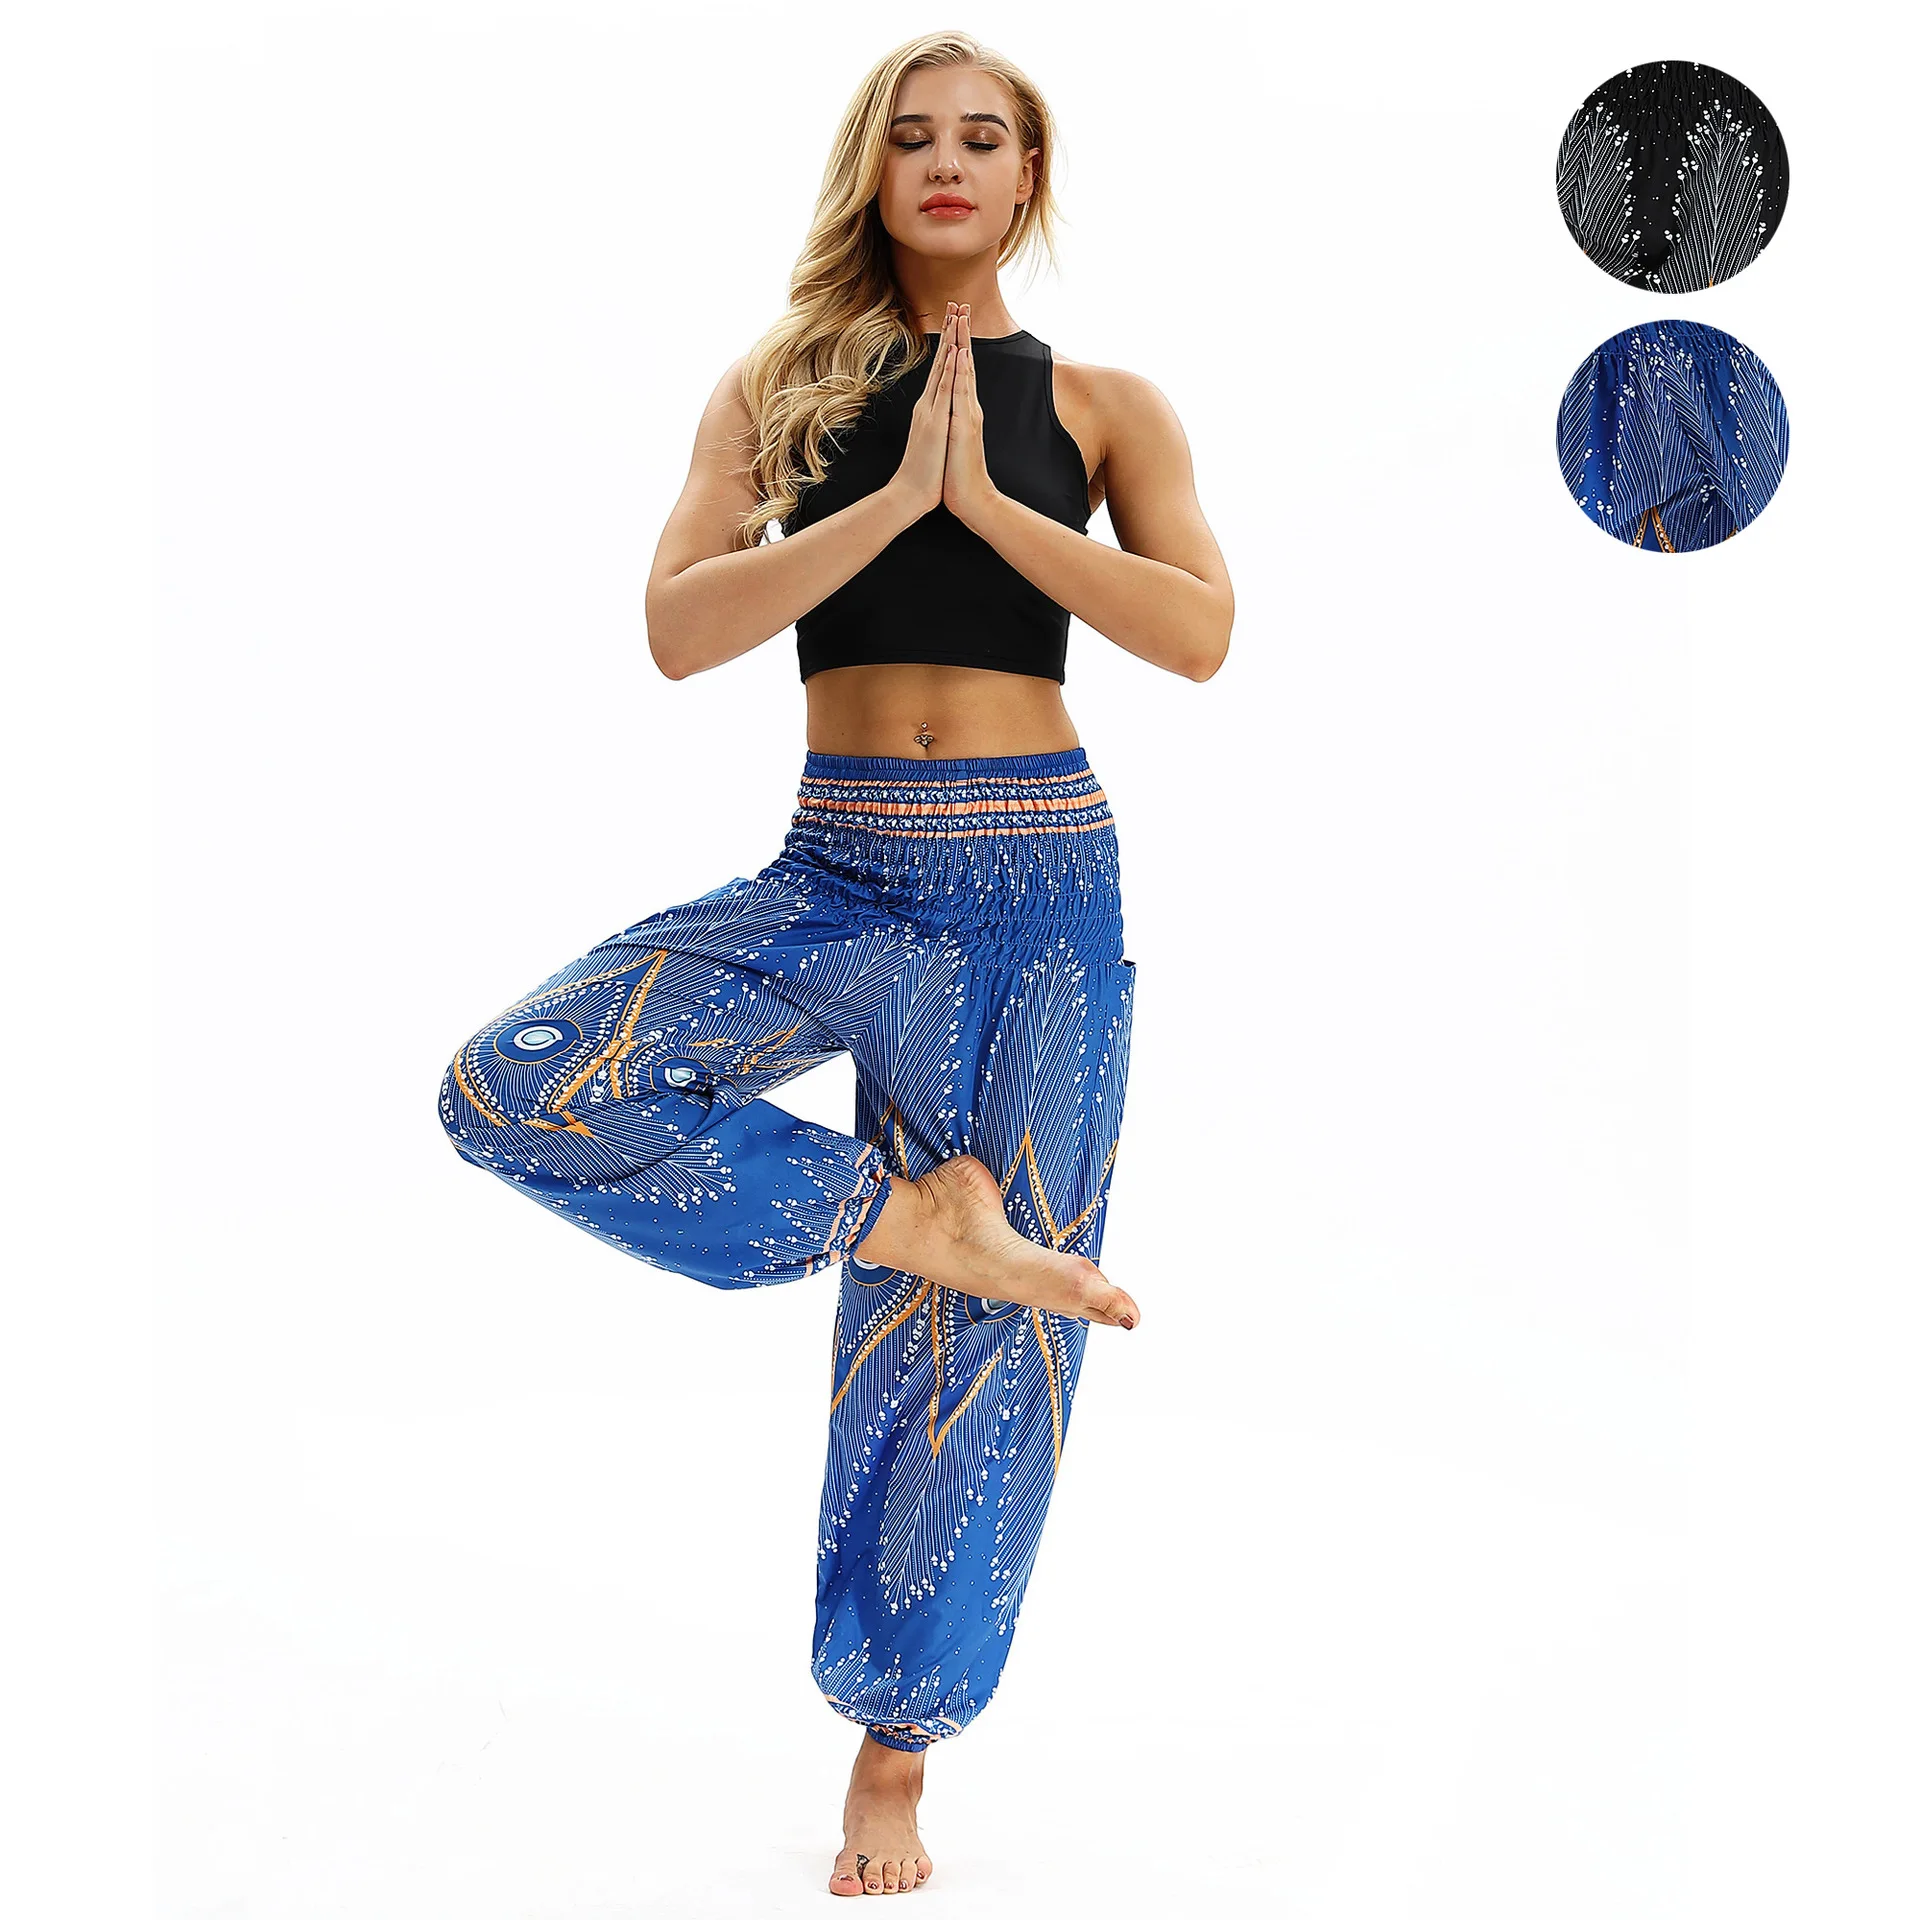 Yoga Wear For Ladies India  International Society of Precision Agriculture